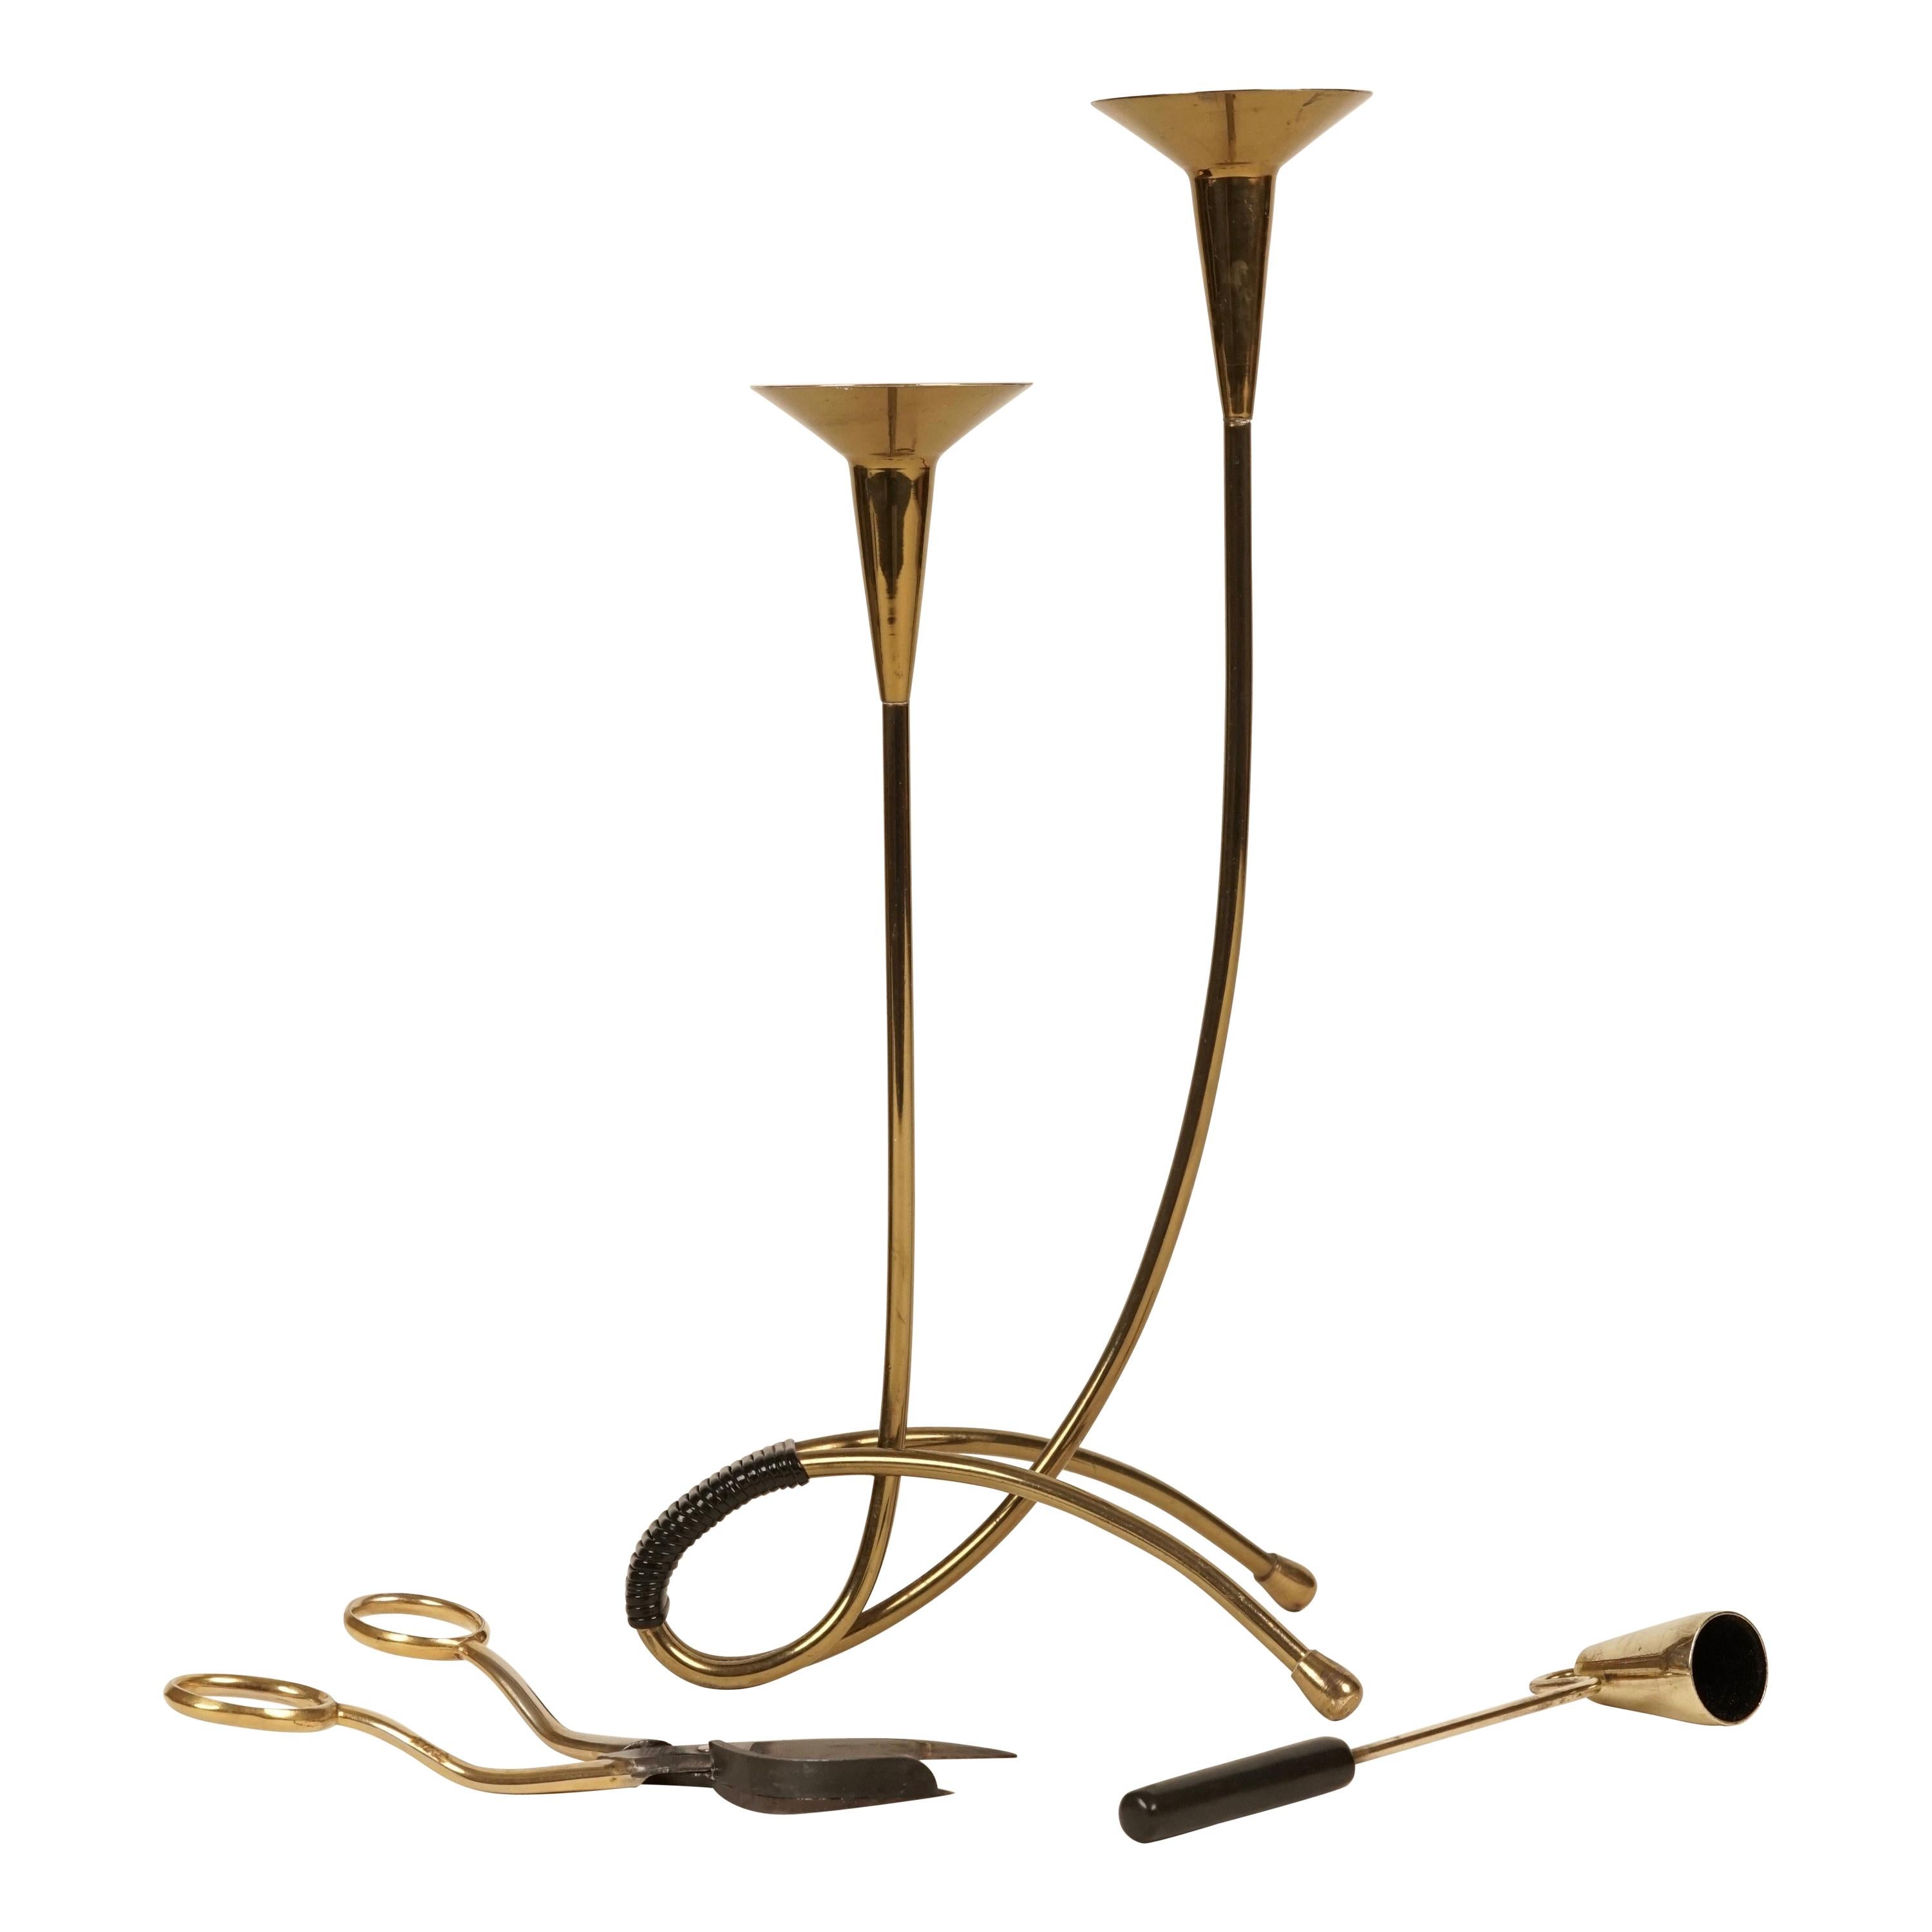 Midcentury Candleholder in Brass from Austria